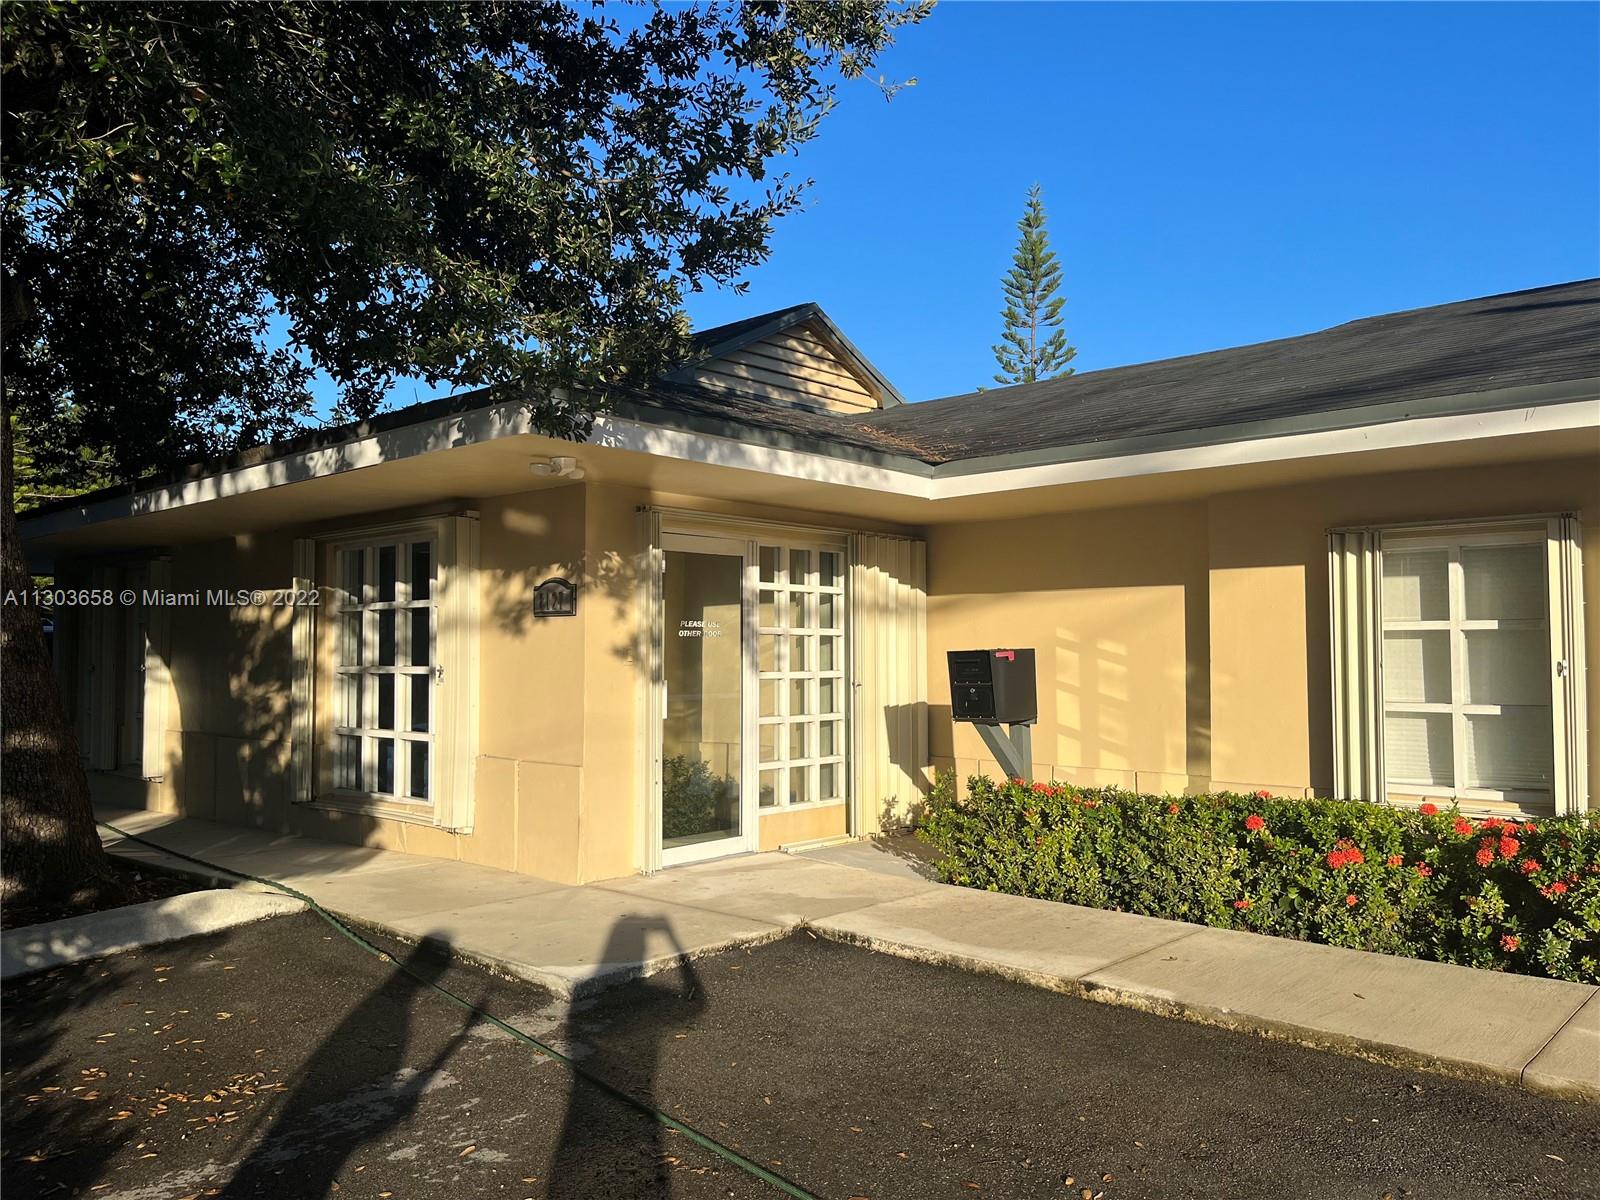 +/- 1,500 SF Turnkey Professional office space is immediately available for Lease in Pinecrest. The building was recently fully renovated.  The office space is private with a dedicated parking space and a private entrance.  The Turnkey space includes three executive offices with lots of windows for natural light, a large storage room, bathroom with 24-hour access.  Parking is ample to include three dedicated spaces, municipal parking along the perimeter of the building, and parking agreements with the shopping center adjacent to the building. Ideal tenants include Tax, Insurance and Accounting, and Legal; all professional office uses are suitable "except" Medical. or Dental which are not permitted. Showing by appointment only.